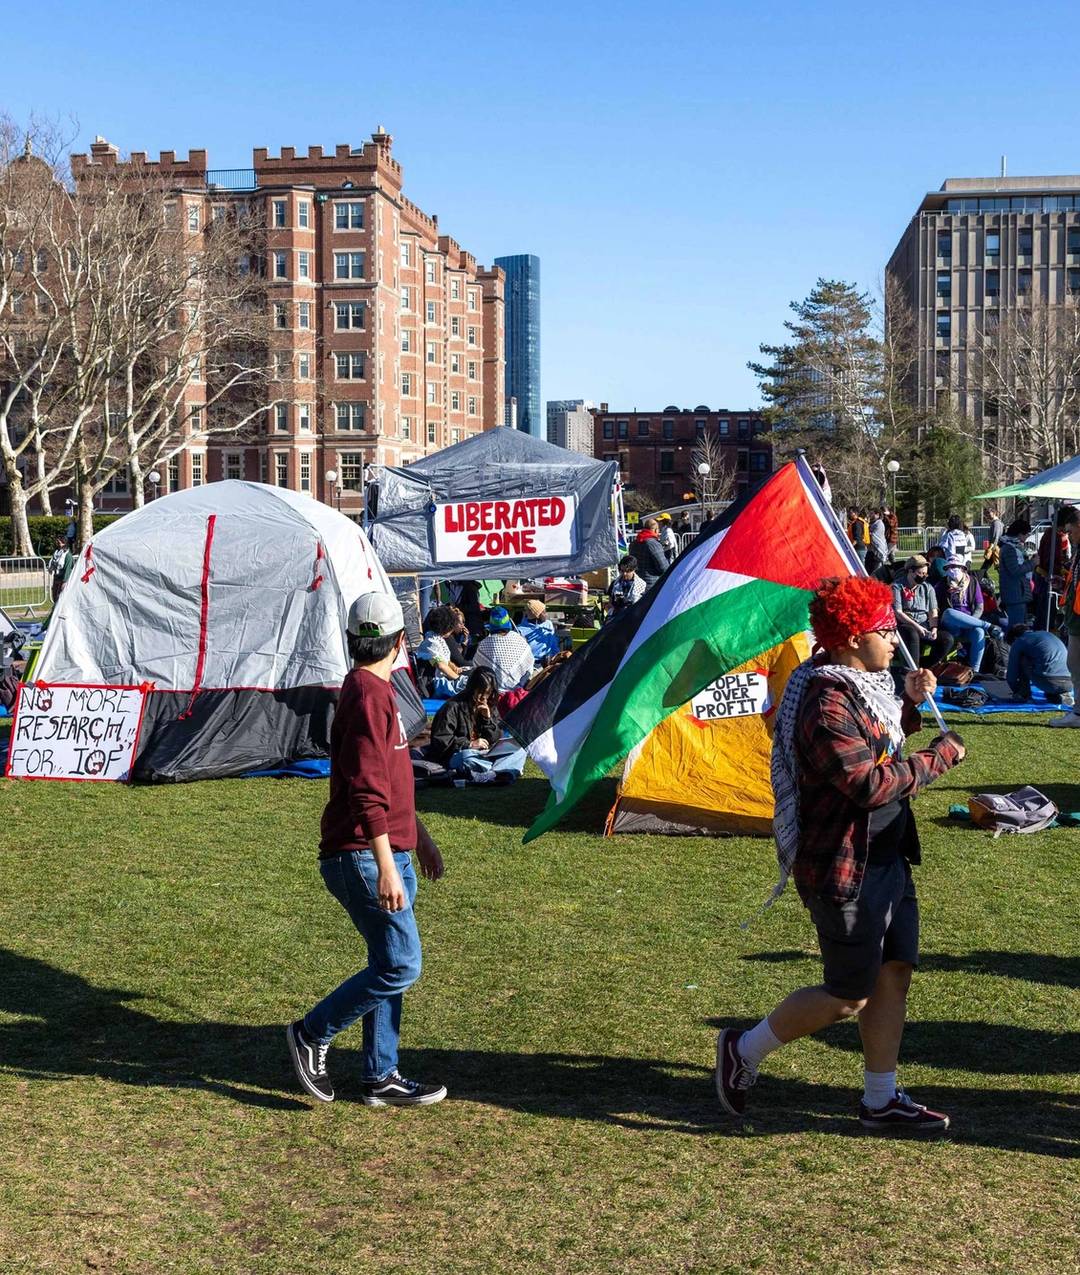 Students from Massachusetts Institute of Technology, Harvard University, and others rally at a protest encampment by the Scientists Against Genocide on MIT's Kresge Lawn in Cambridge, Massachusetts, on April 22, 2024